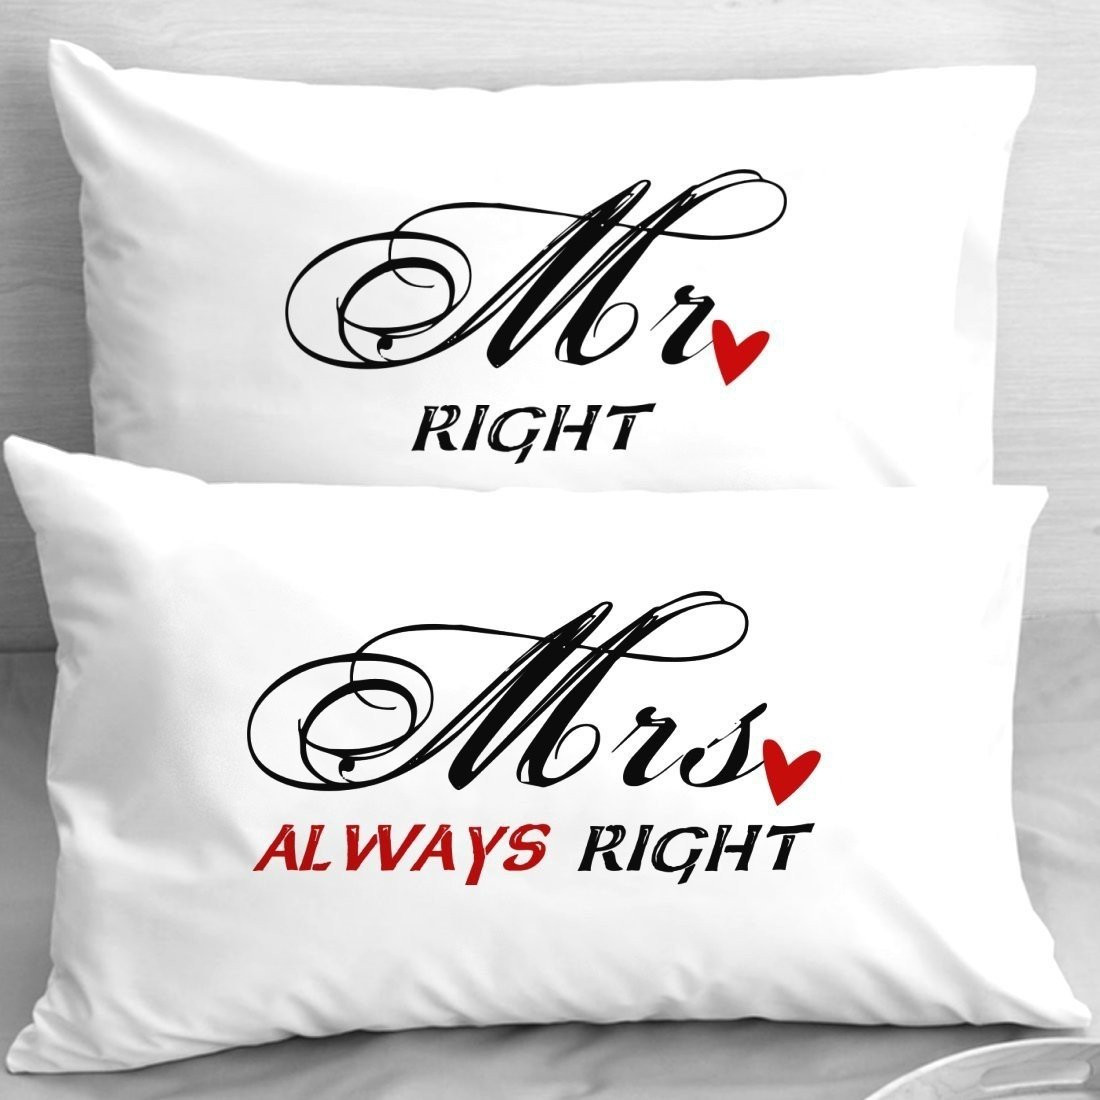 Anniversary Gift Ideas For Couples
 10 Stunning 25Th Wedding Anniversary Gift Ideas For